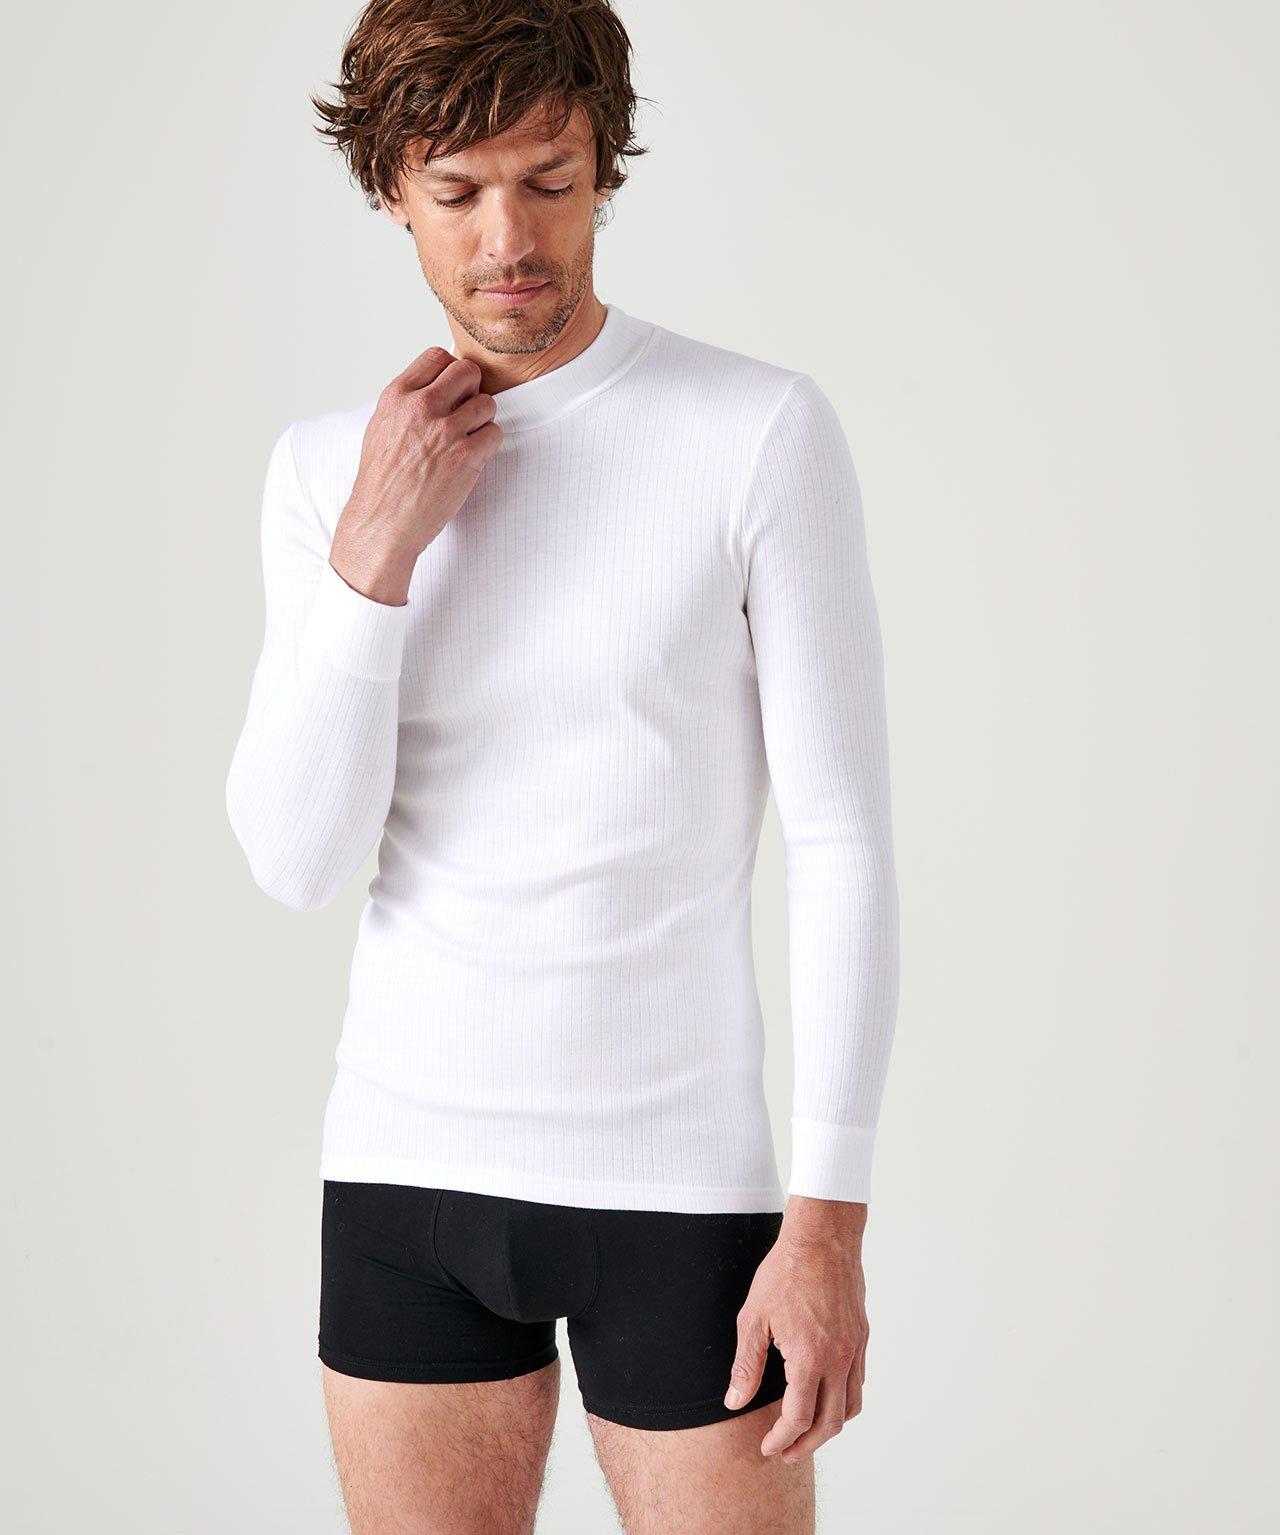 Sous-pull Comfort Thermolactyl 4 homme - Polos, T-shirts, Chemises